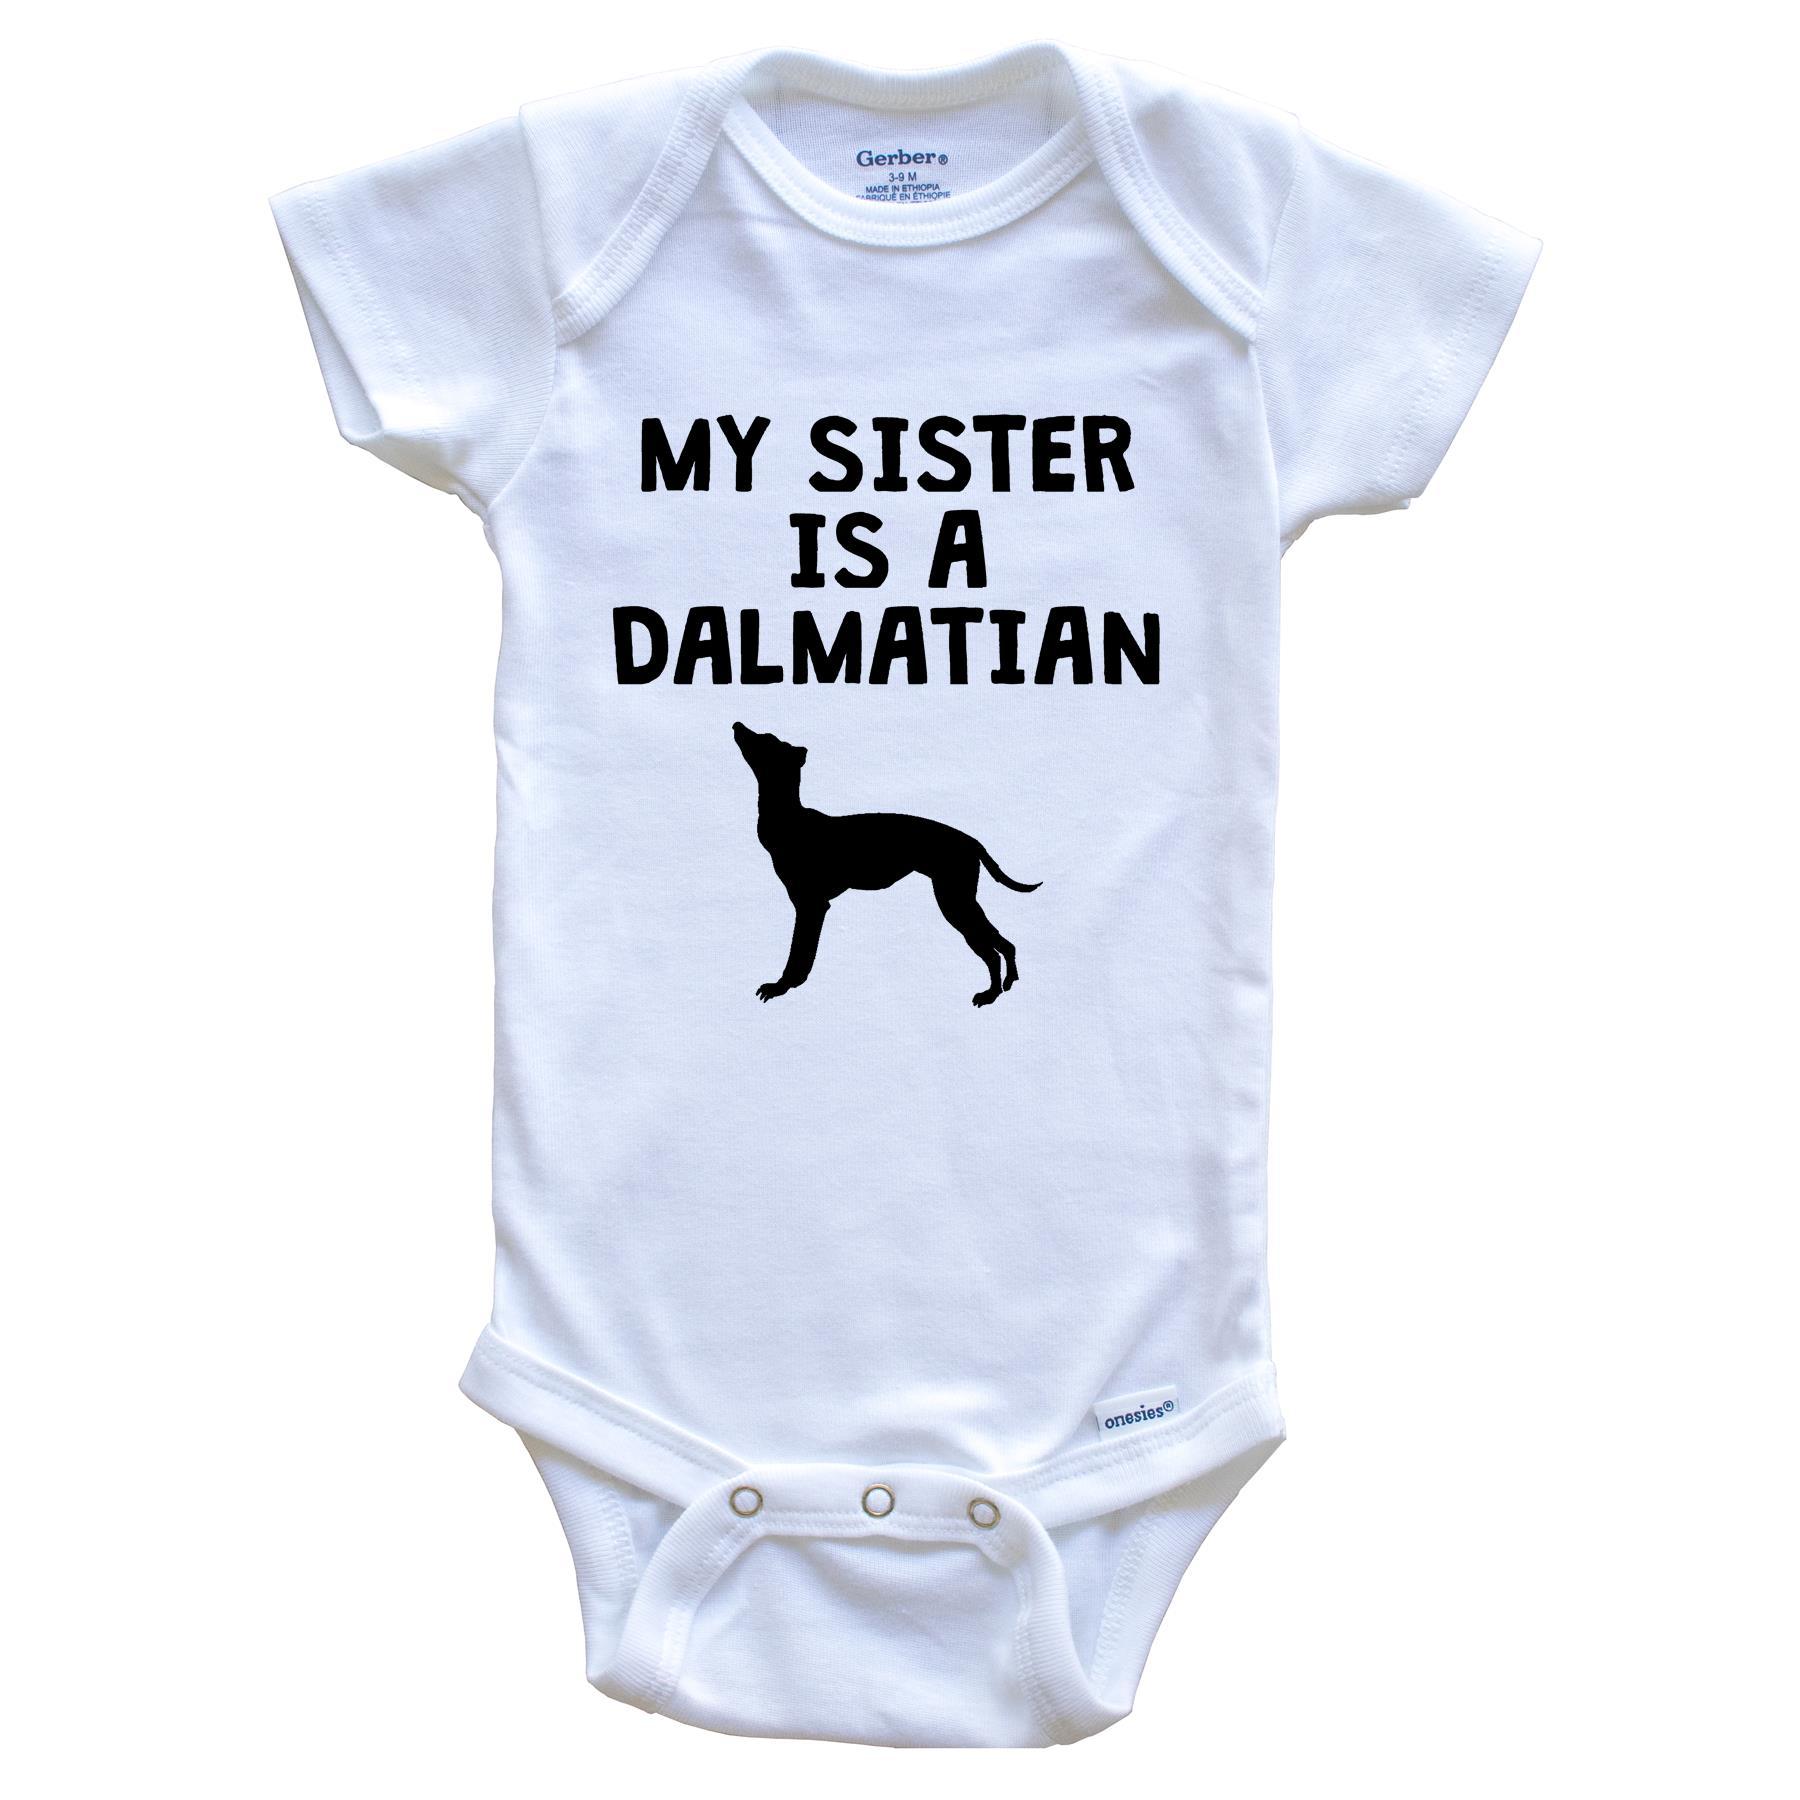 My Sister Is A Dalmatian Baby Onesie